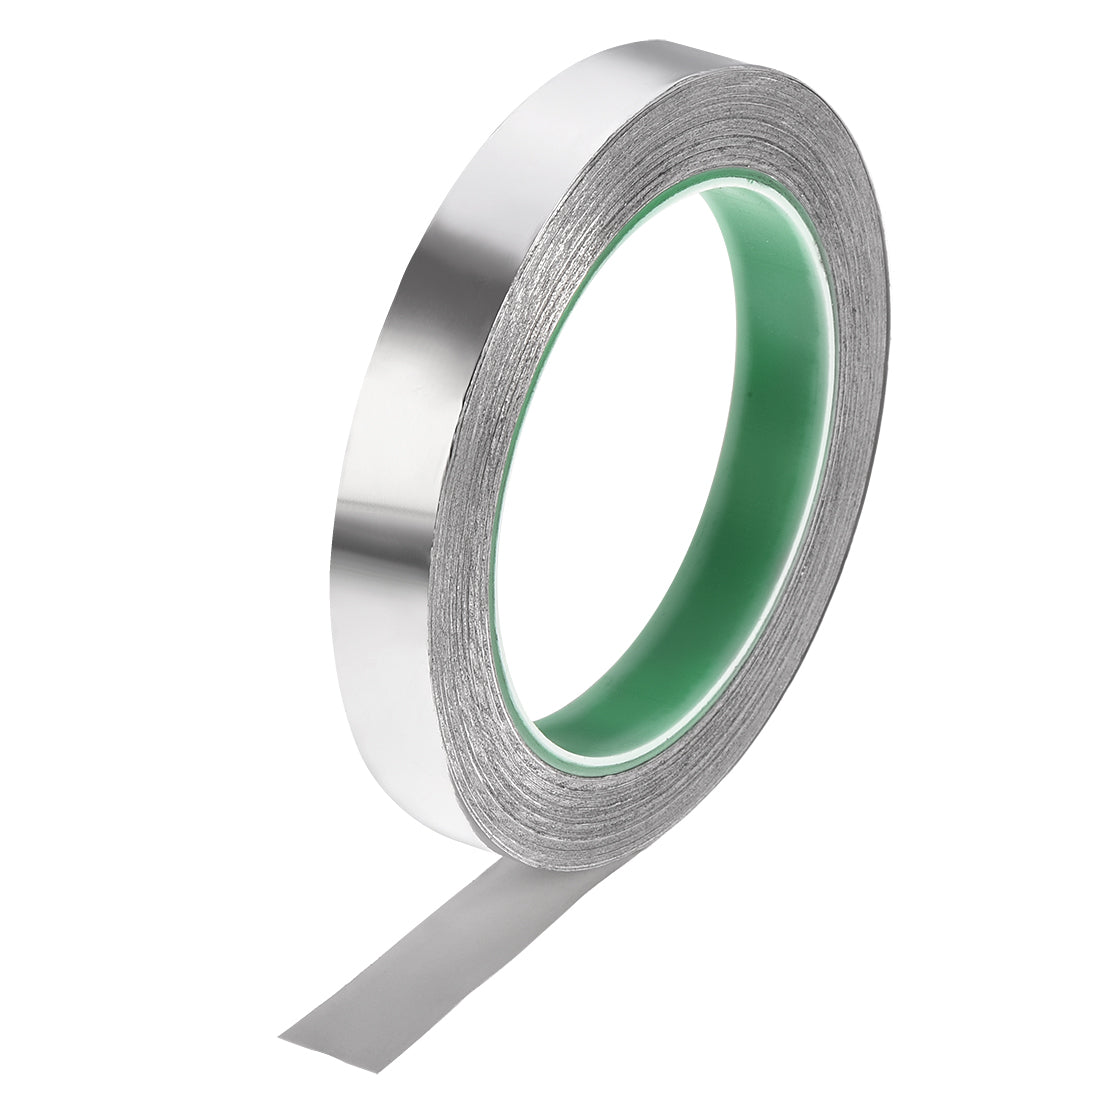 uxcell Uxcell 15mm Aluminum Foil Tape for HVAC,Patching Hot and Cold Air Ducts 20m/65.6ft